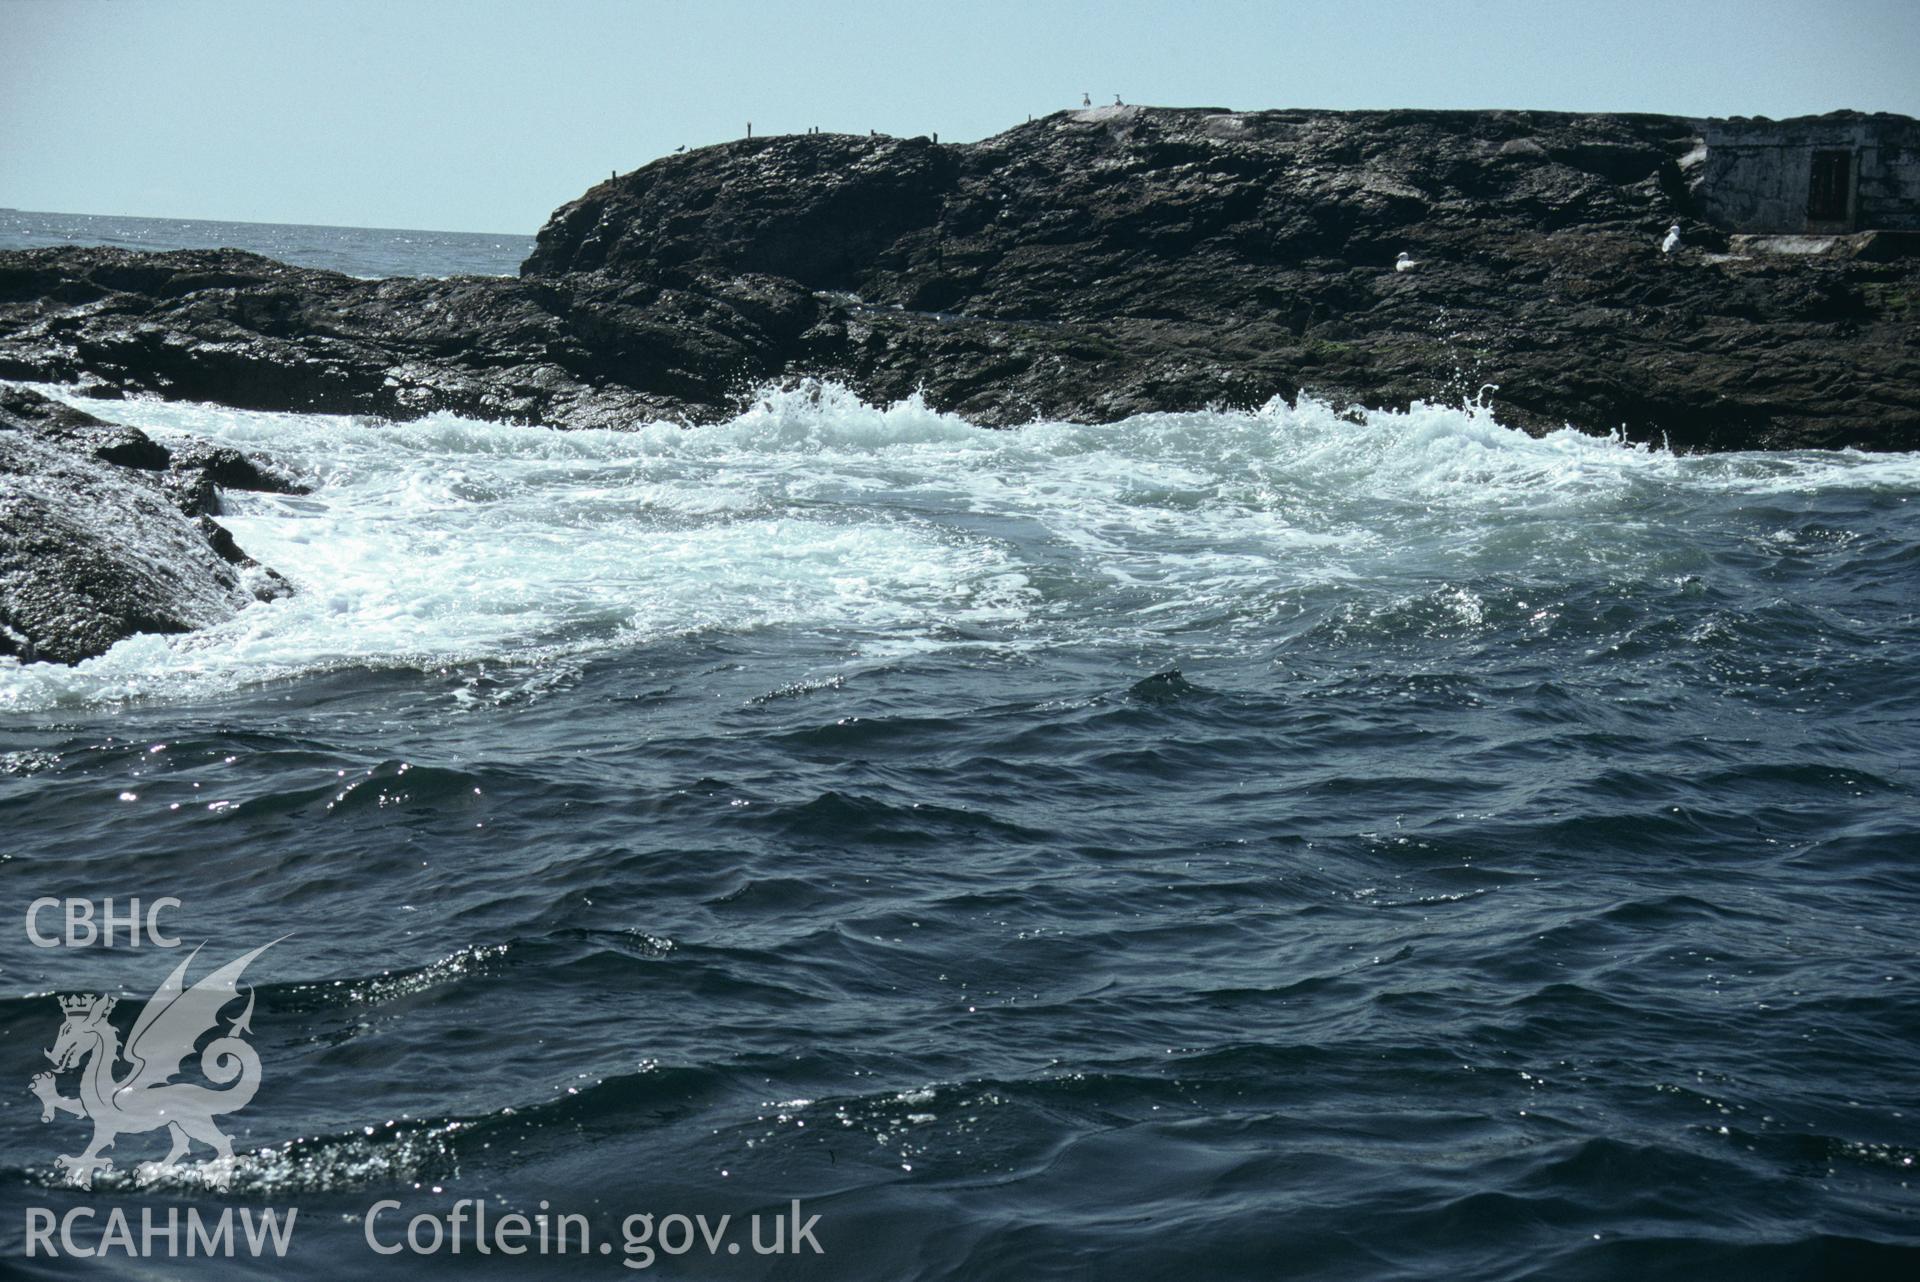 View of seawater surging through a gully between the rocky outcrops of the Smalls reef, one of a set of 22 colour slides from a survey of the Smalls designated shipwreck area, carried out by the Archaeological Diving Unit.